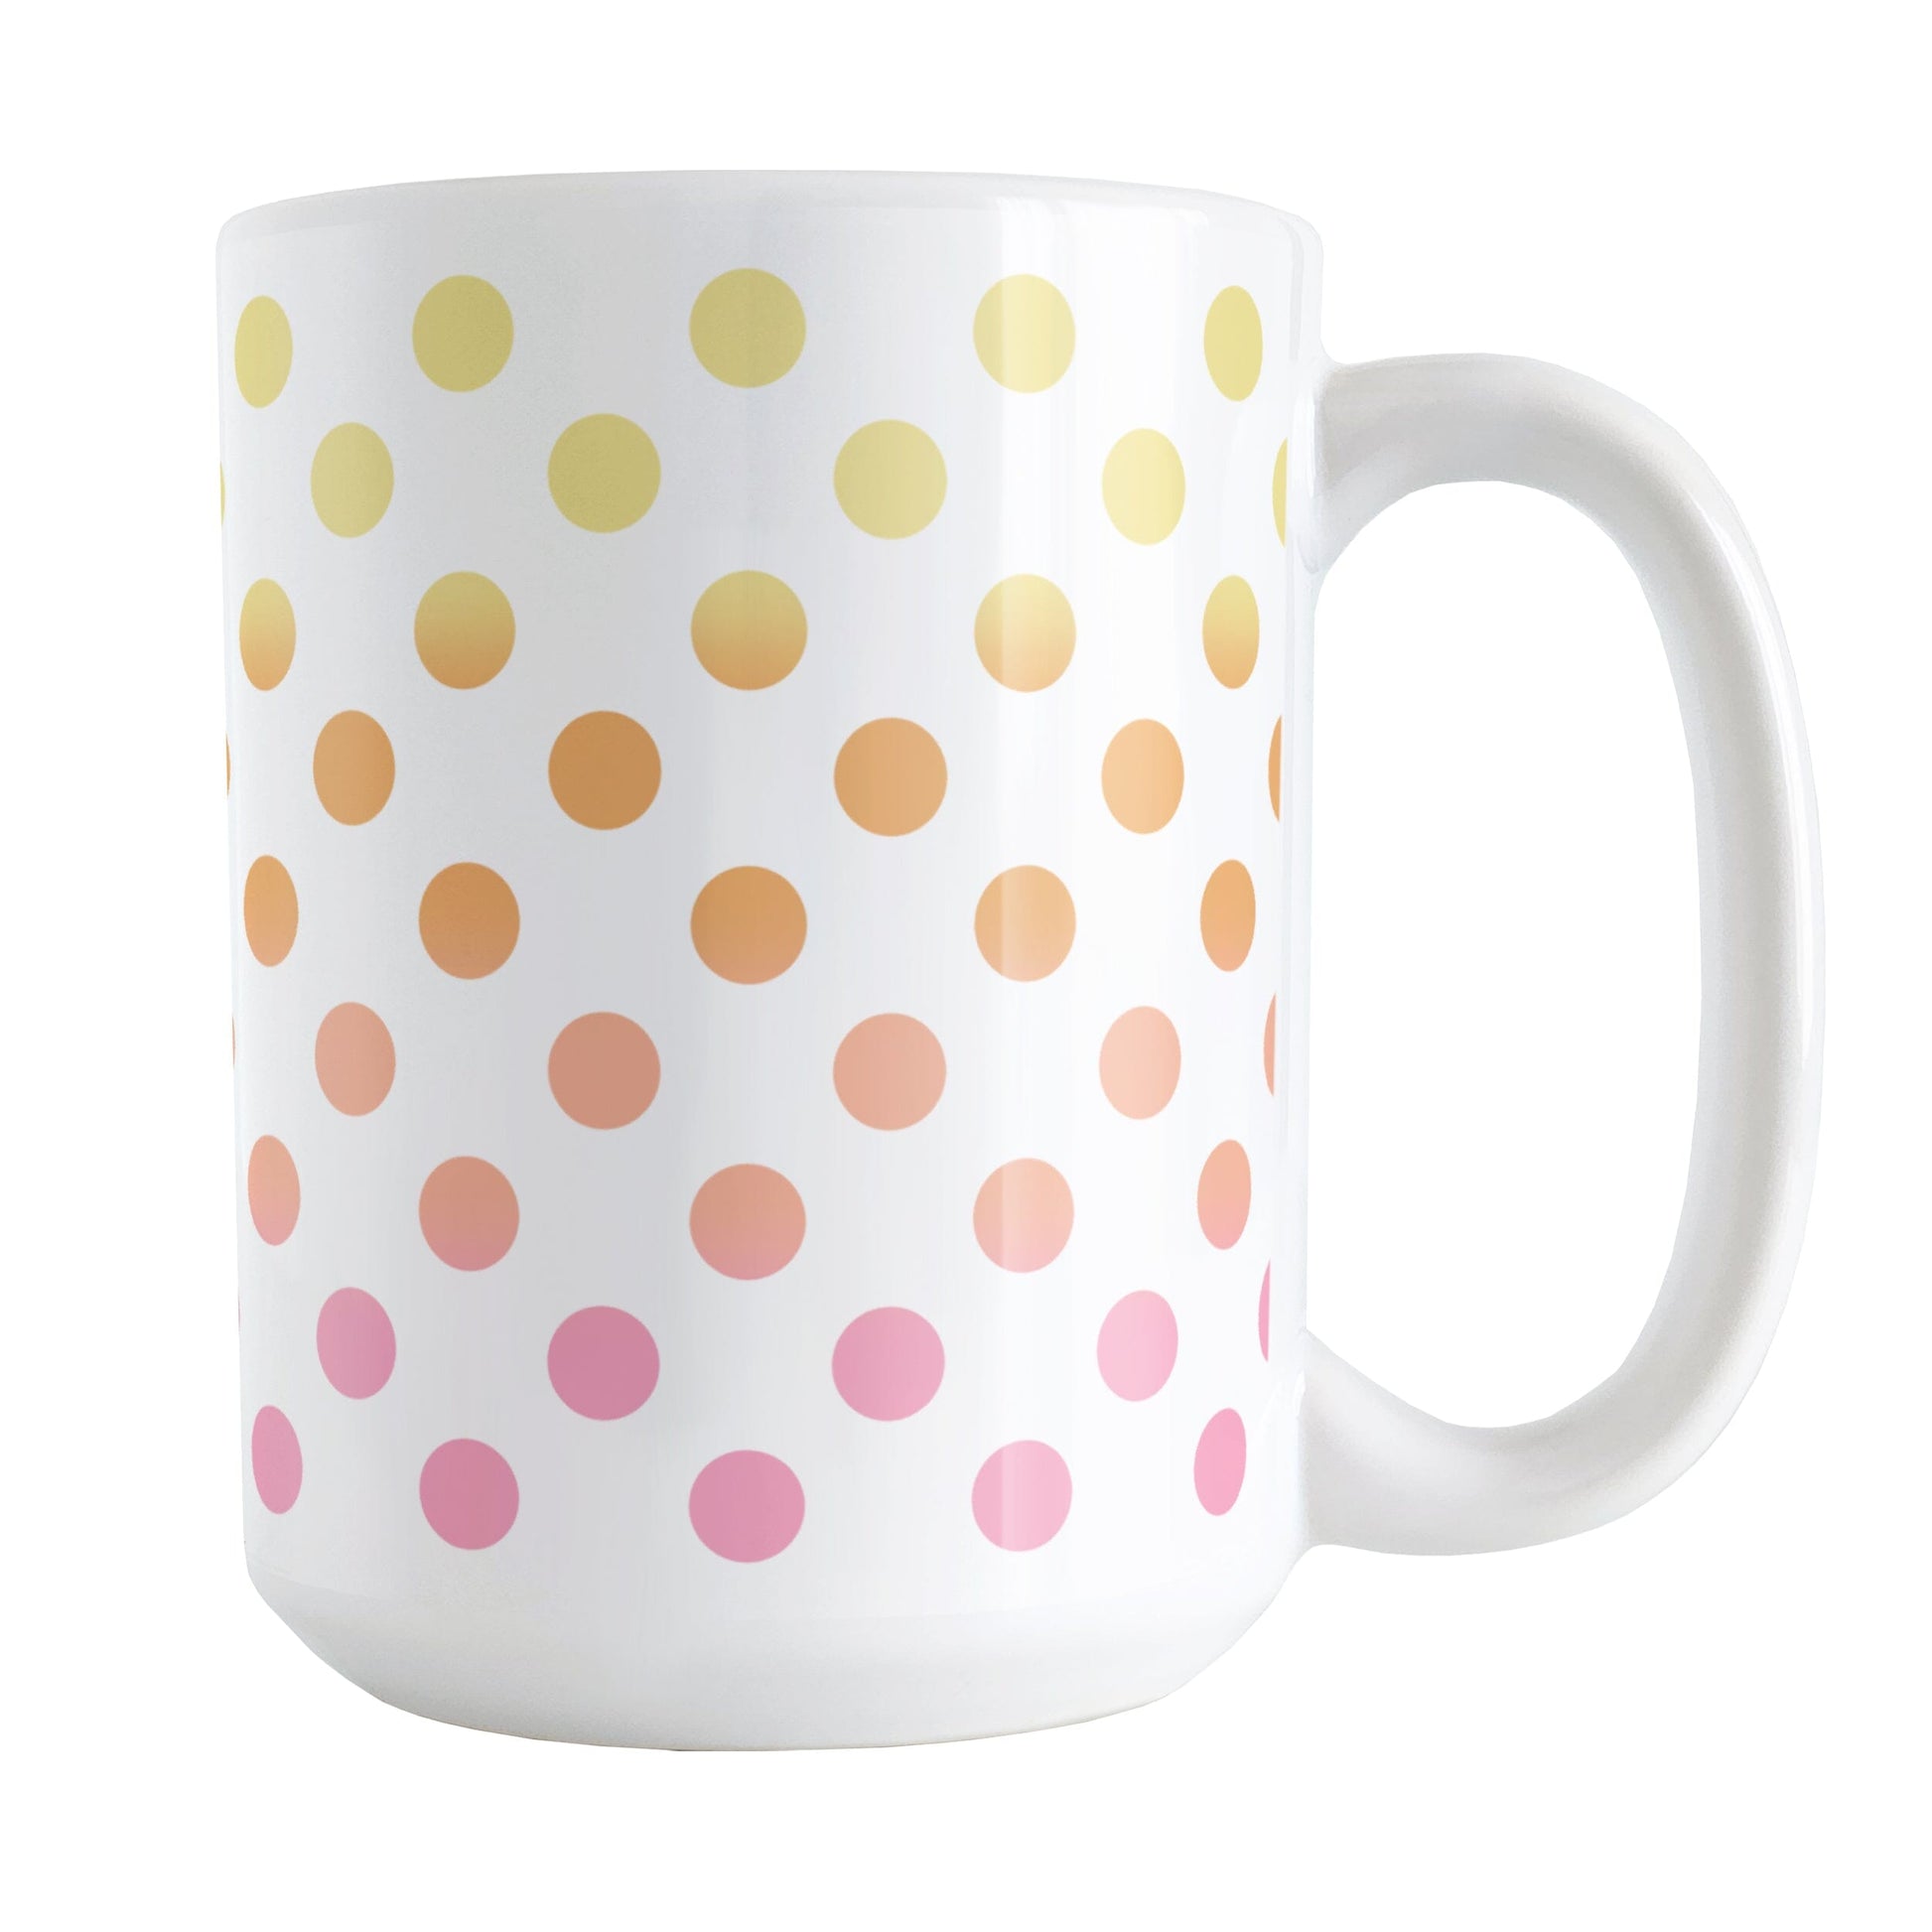 Warm Ombre Polka Dots Mug (15oz) at Amy's Coffee Mugs. A ceramic coffee mug designed with polka dots in a gradient color progression with yellow, orange, peach, and pink in a pattern that wraps around the mug to the handle.